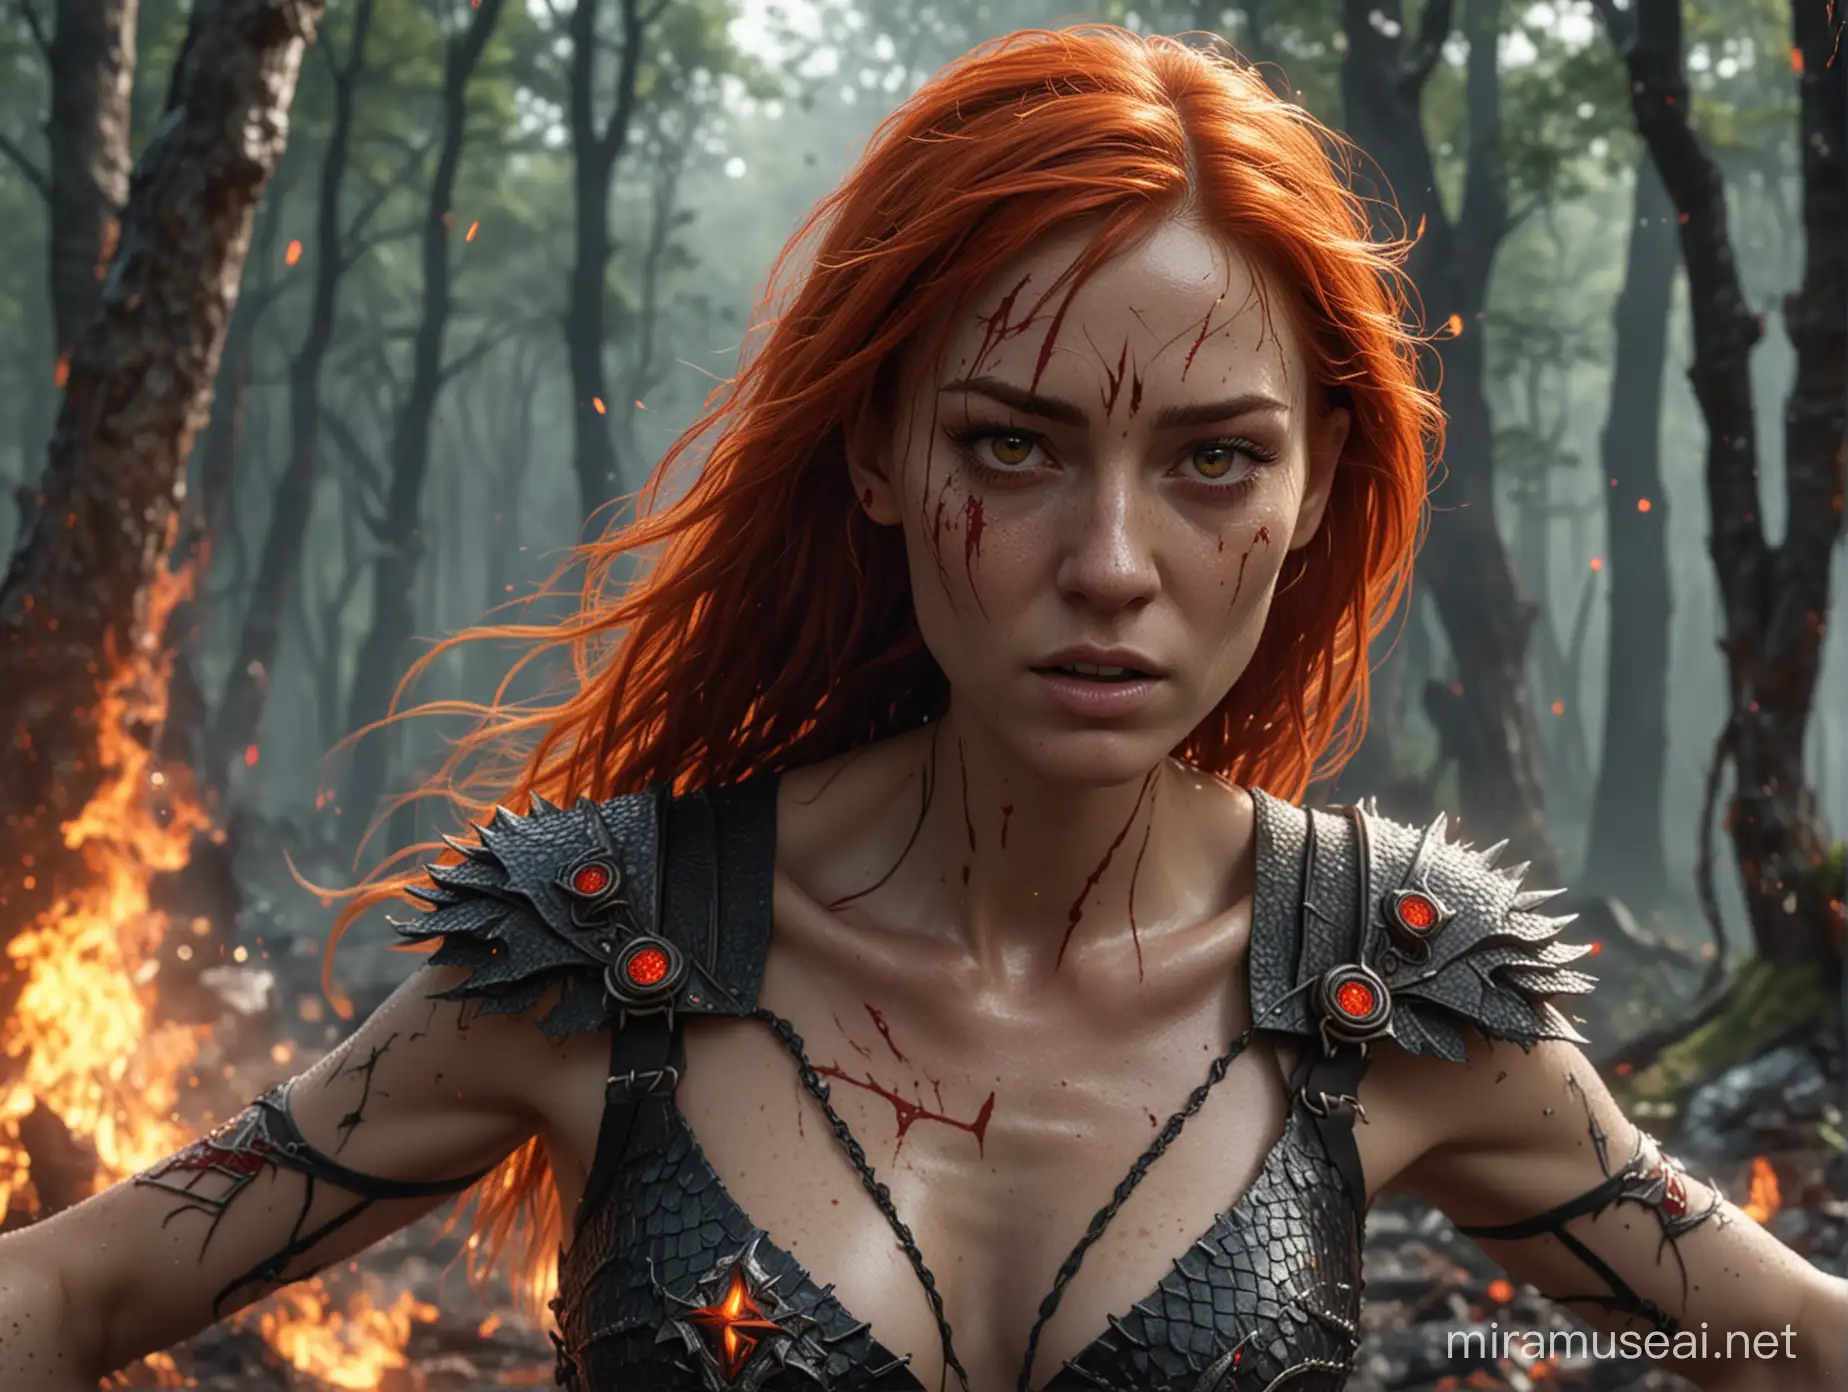 hyperrealistic very high detail 4k full size image taken from the front left with depth perception, showing a female human with long fiery red hair thin red eyebrows, burning red eyes and face full of freckles, with draconic symbols carved into arms and body, sleeveless open front top made of dragon scales, fighting in a bloody battle in a forest throwing bolts of lightning from her hands